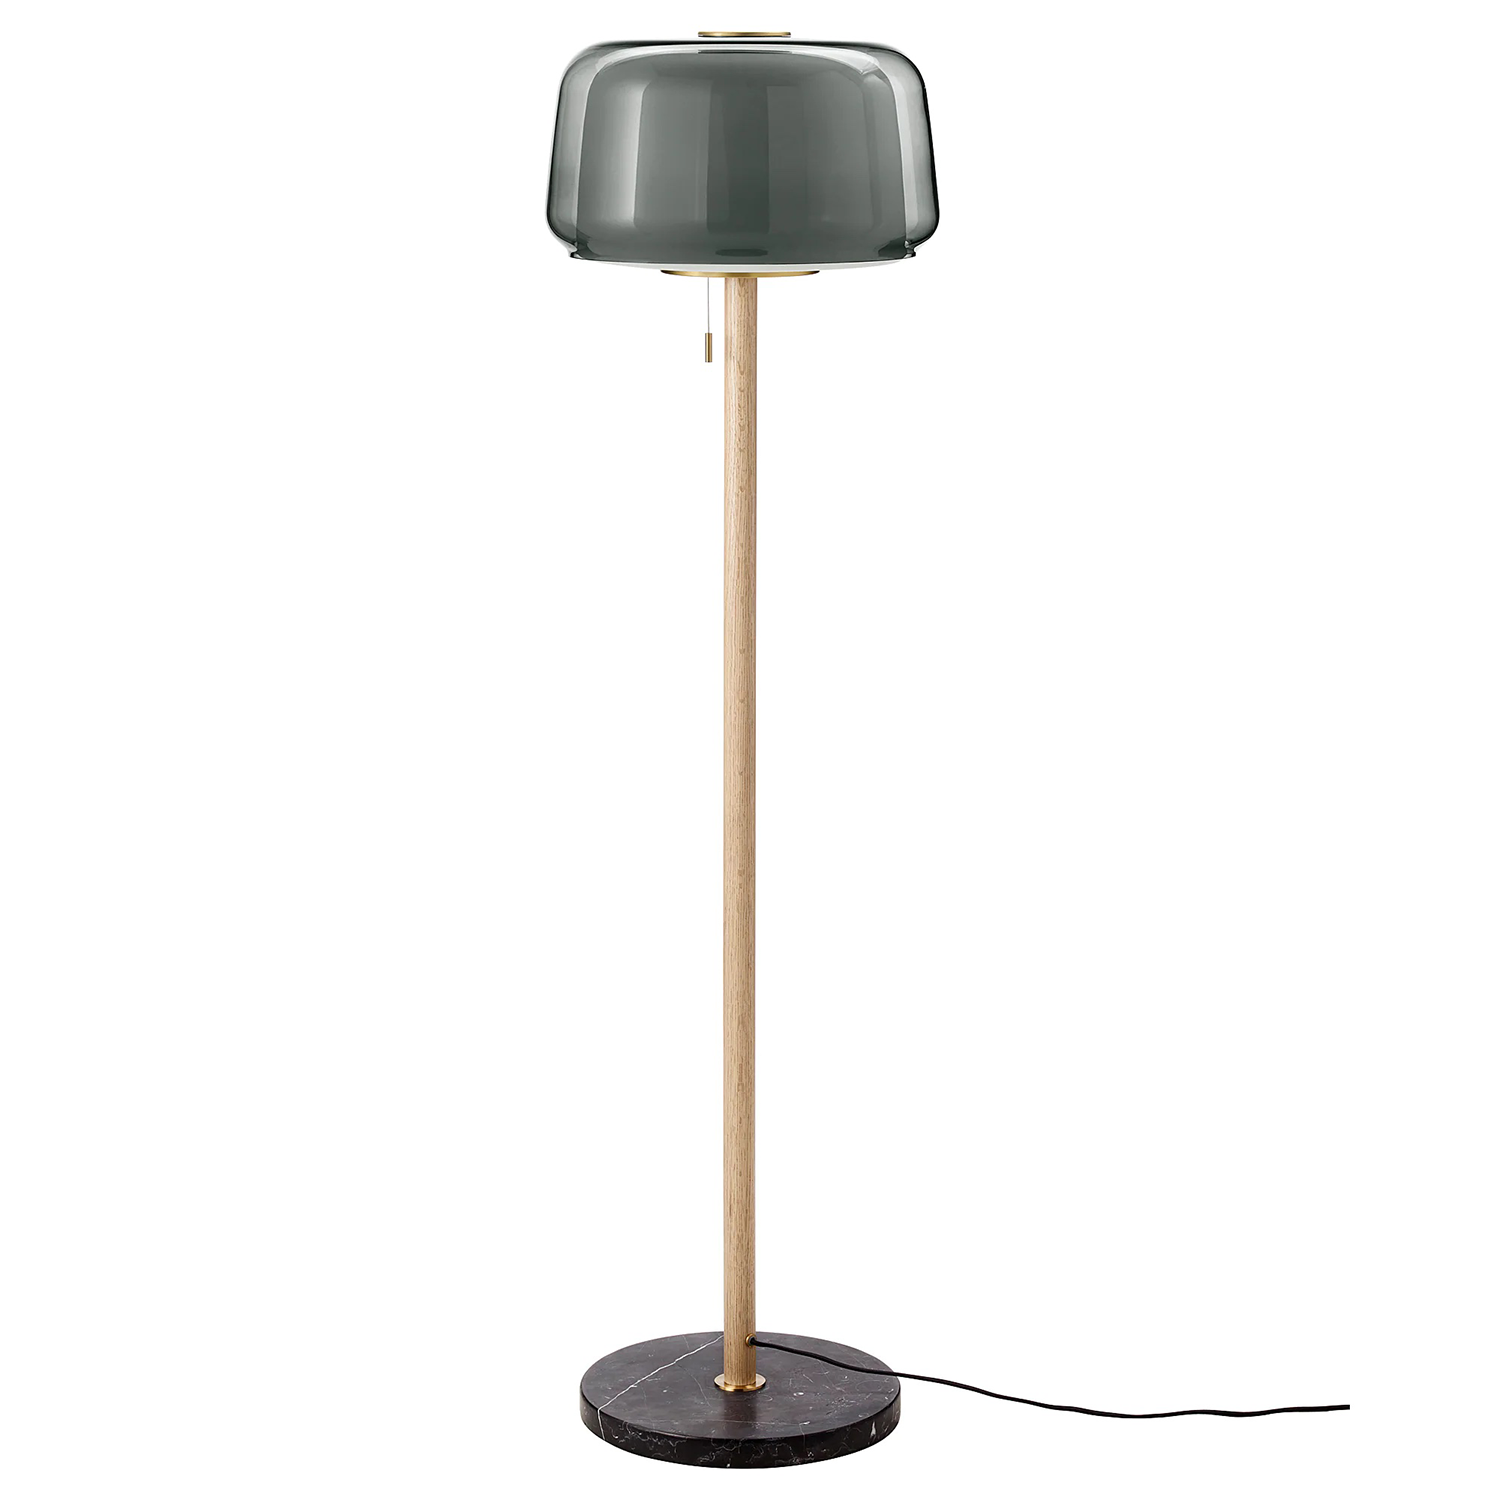 Floor lamp with LED bulb, marble/gray